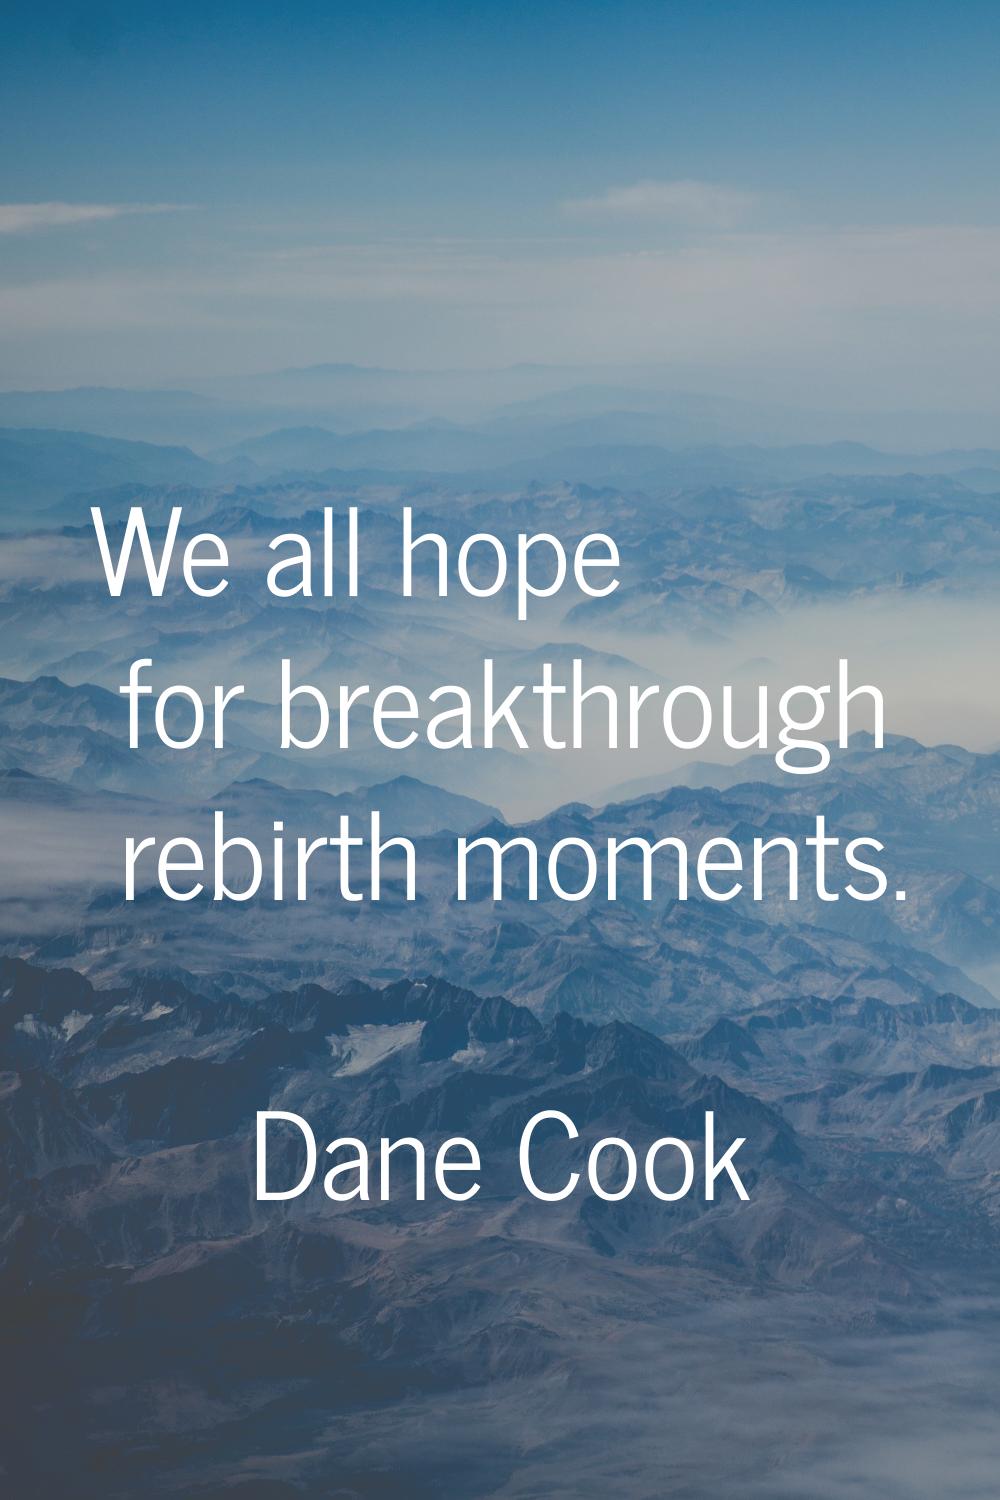 We all hope for breakthrough rebirth moments.